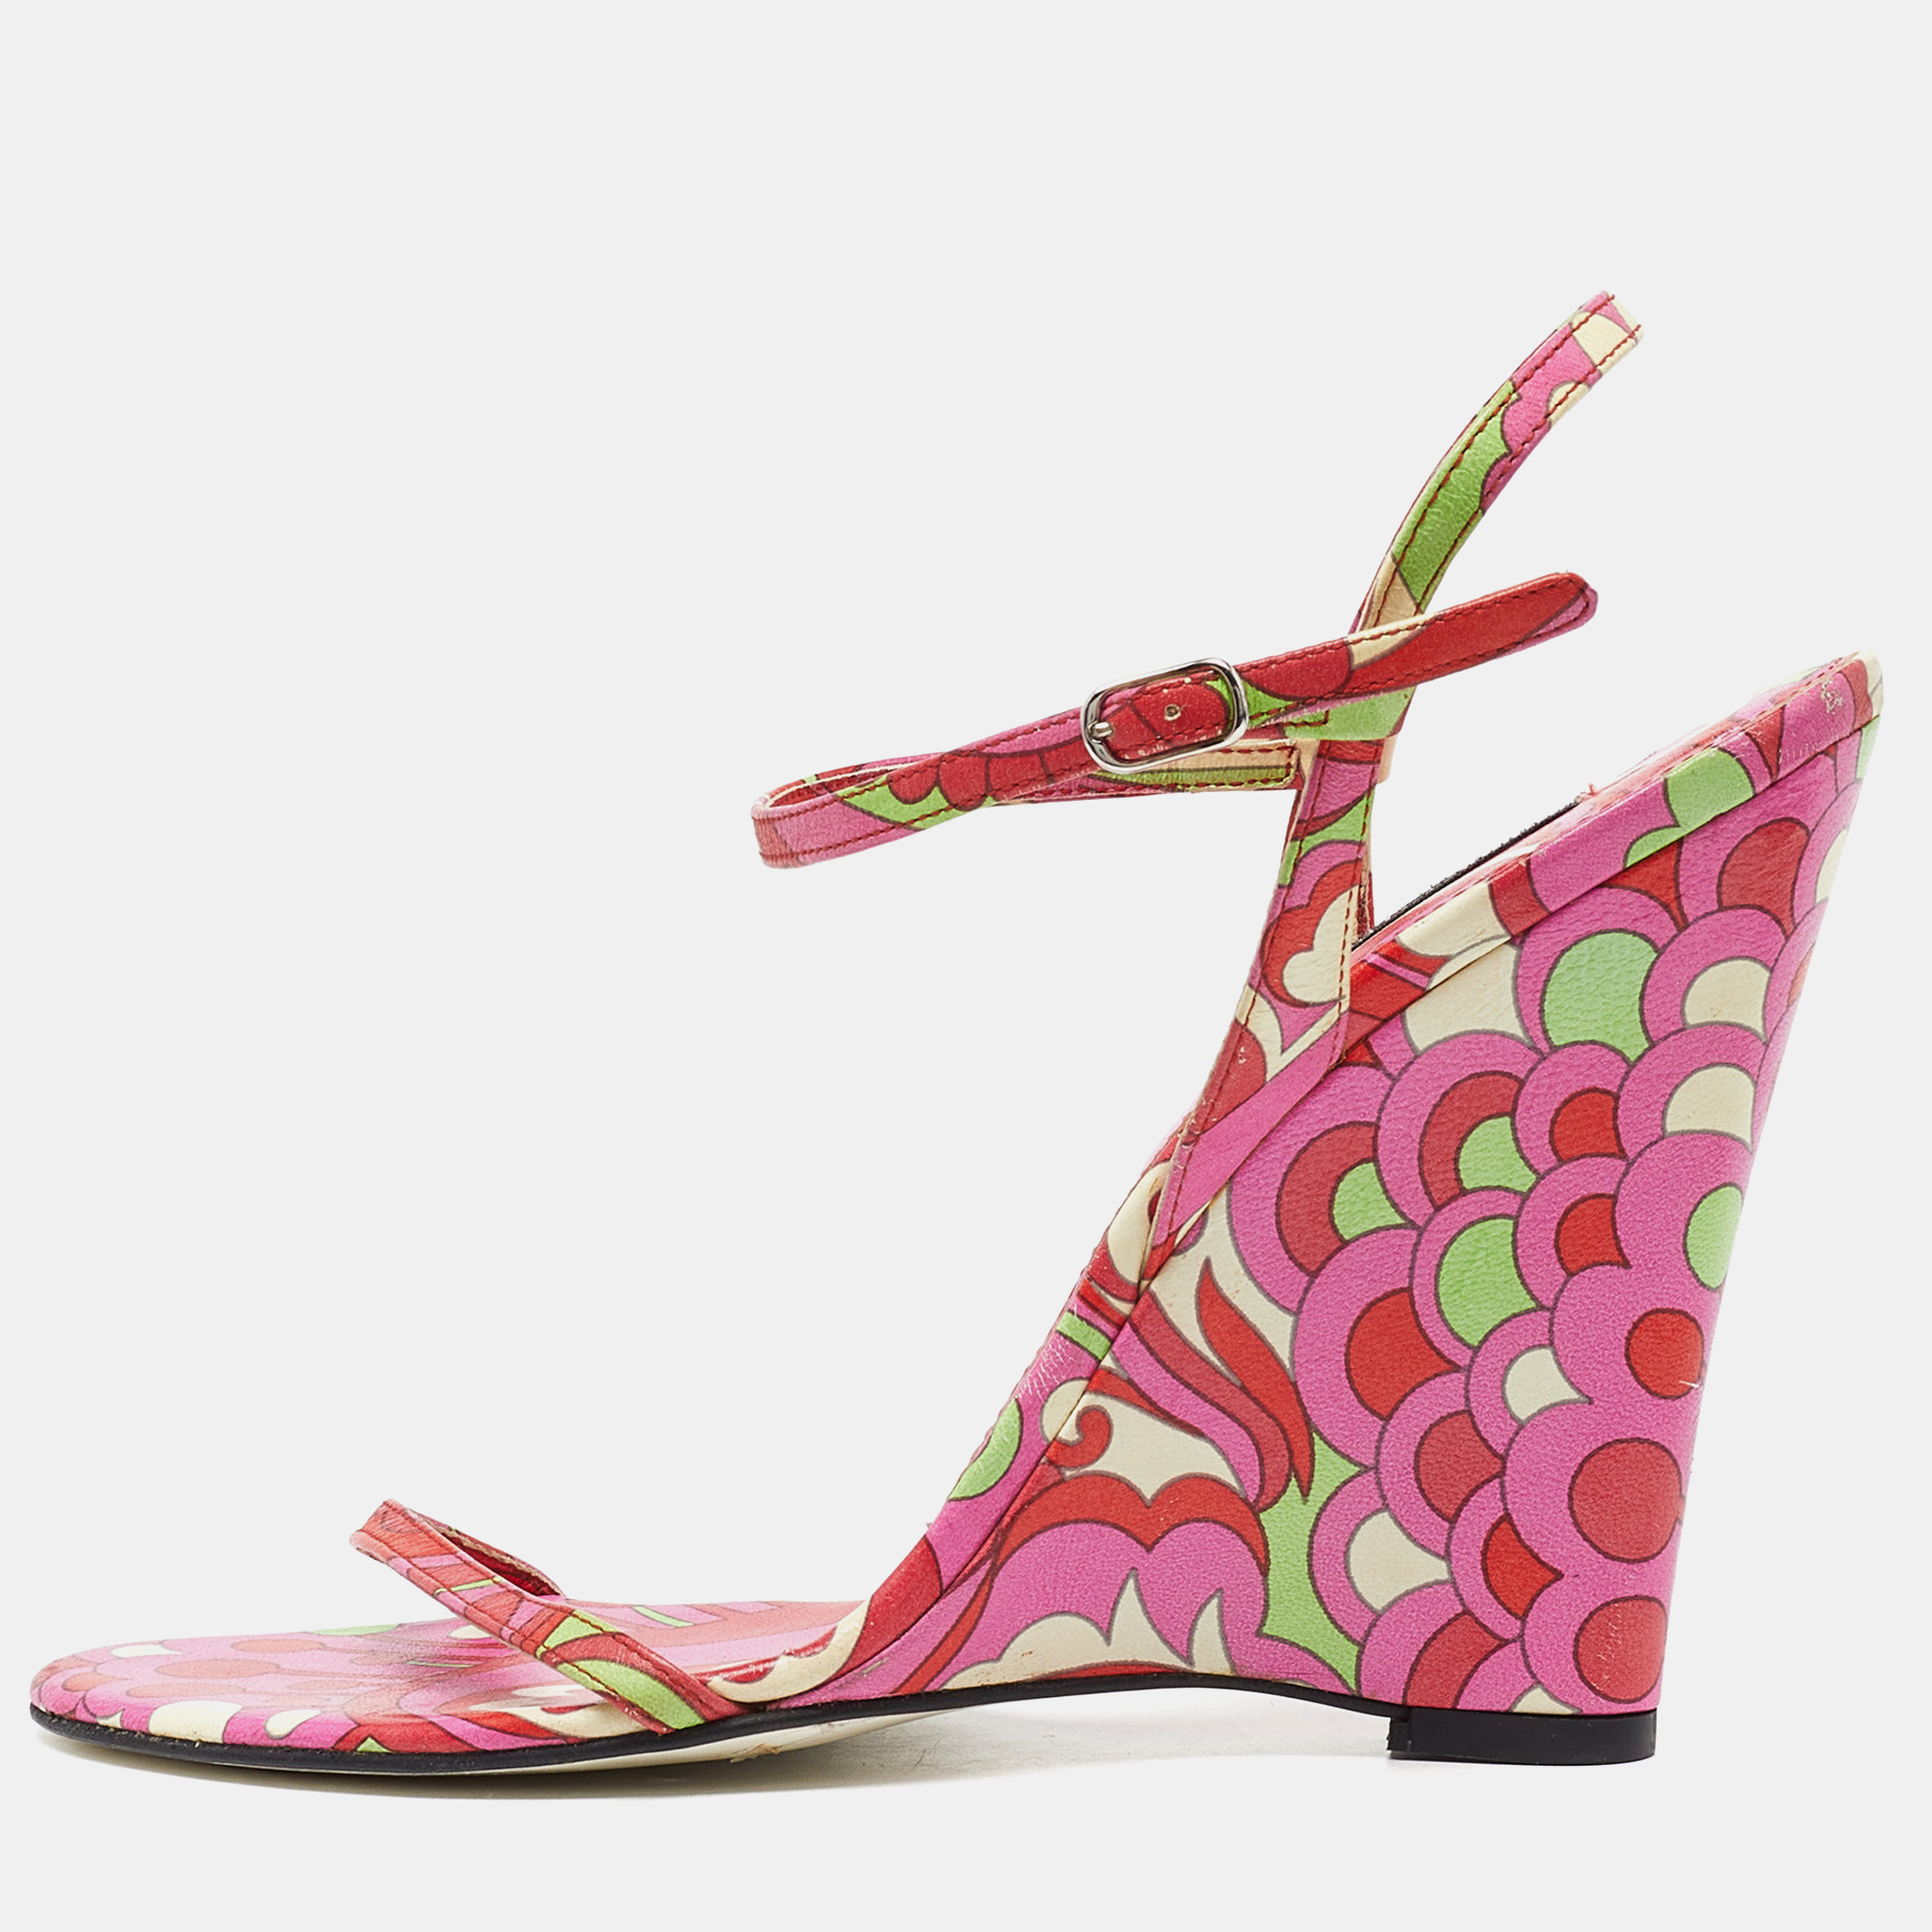 Dolce & gabbana multicolor print leather wedge sandals size 38.5